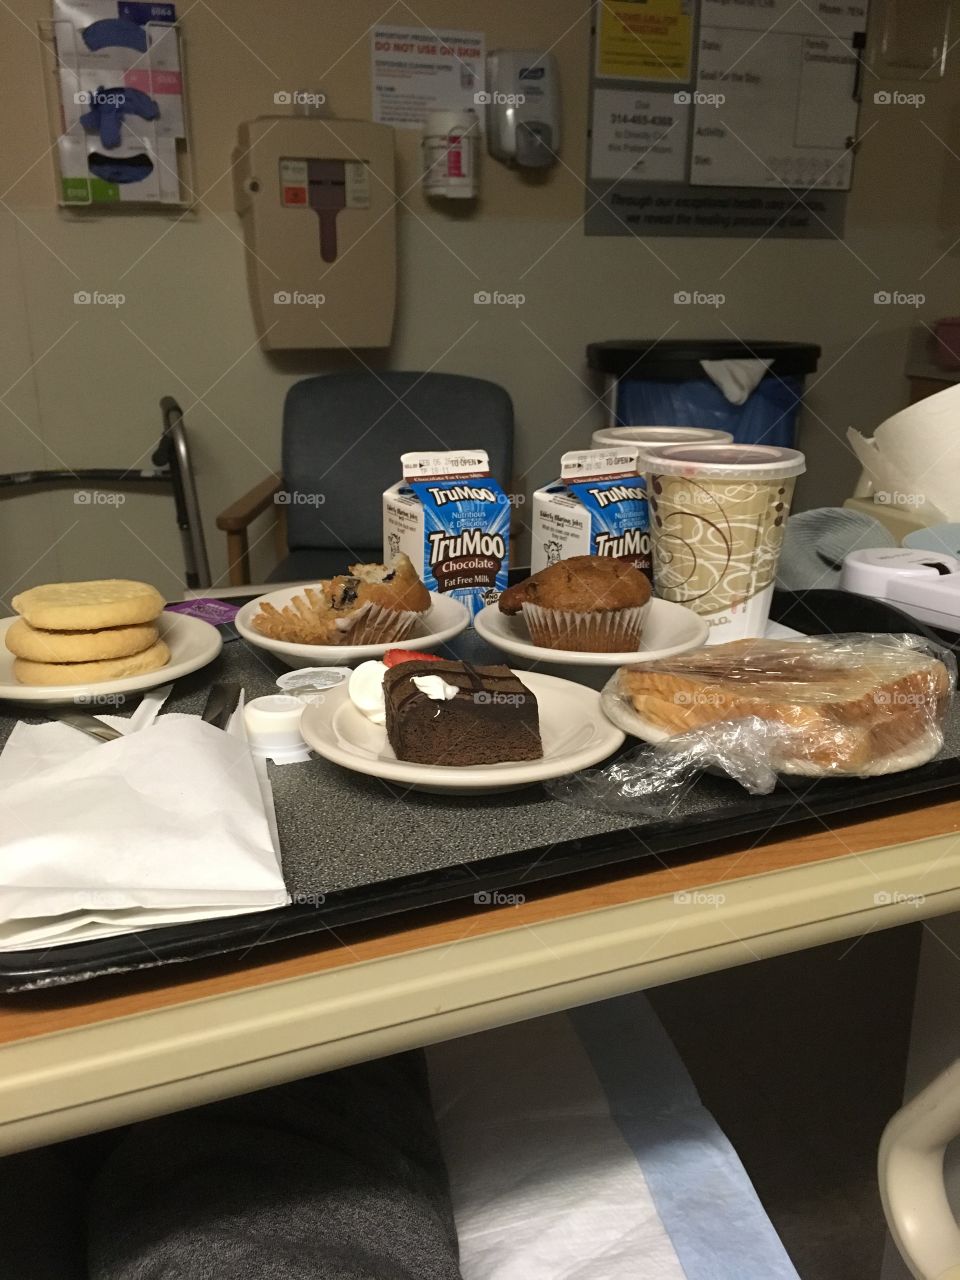 Hospitals literally let you order anything you want.  This is why I do not feed myself.